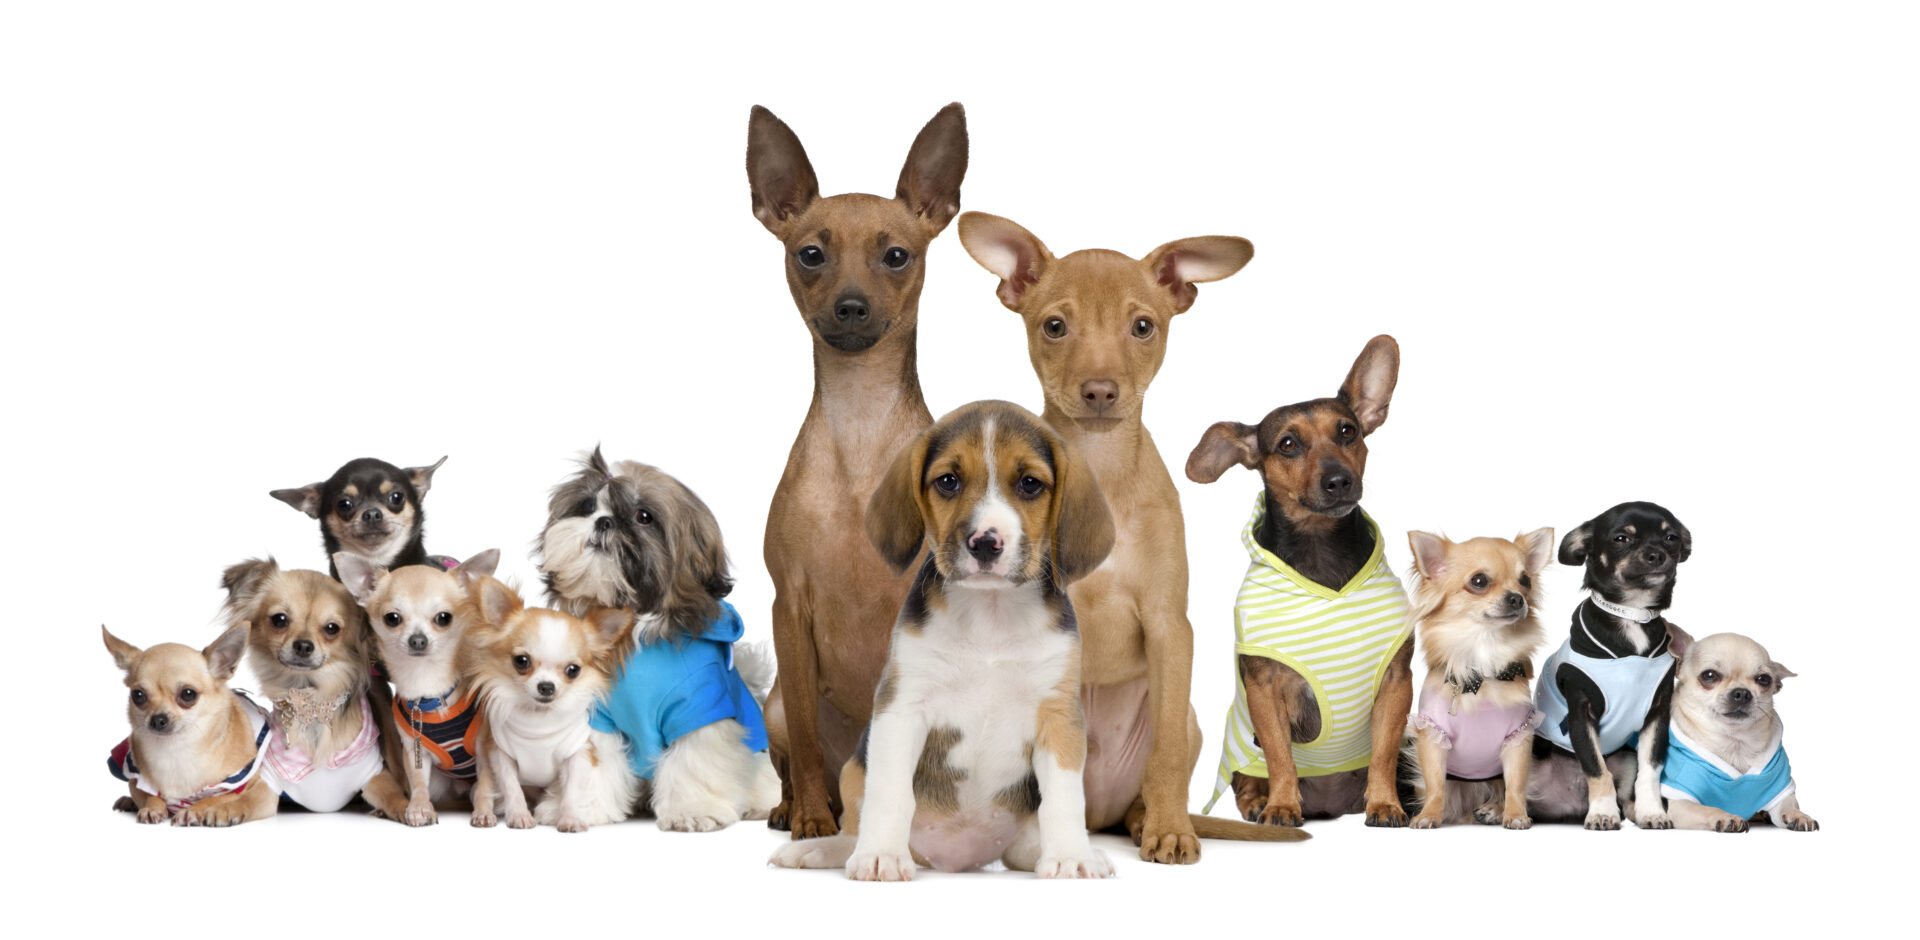 Portrait of small dogs in front of white background, studio shot.